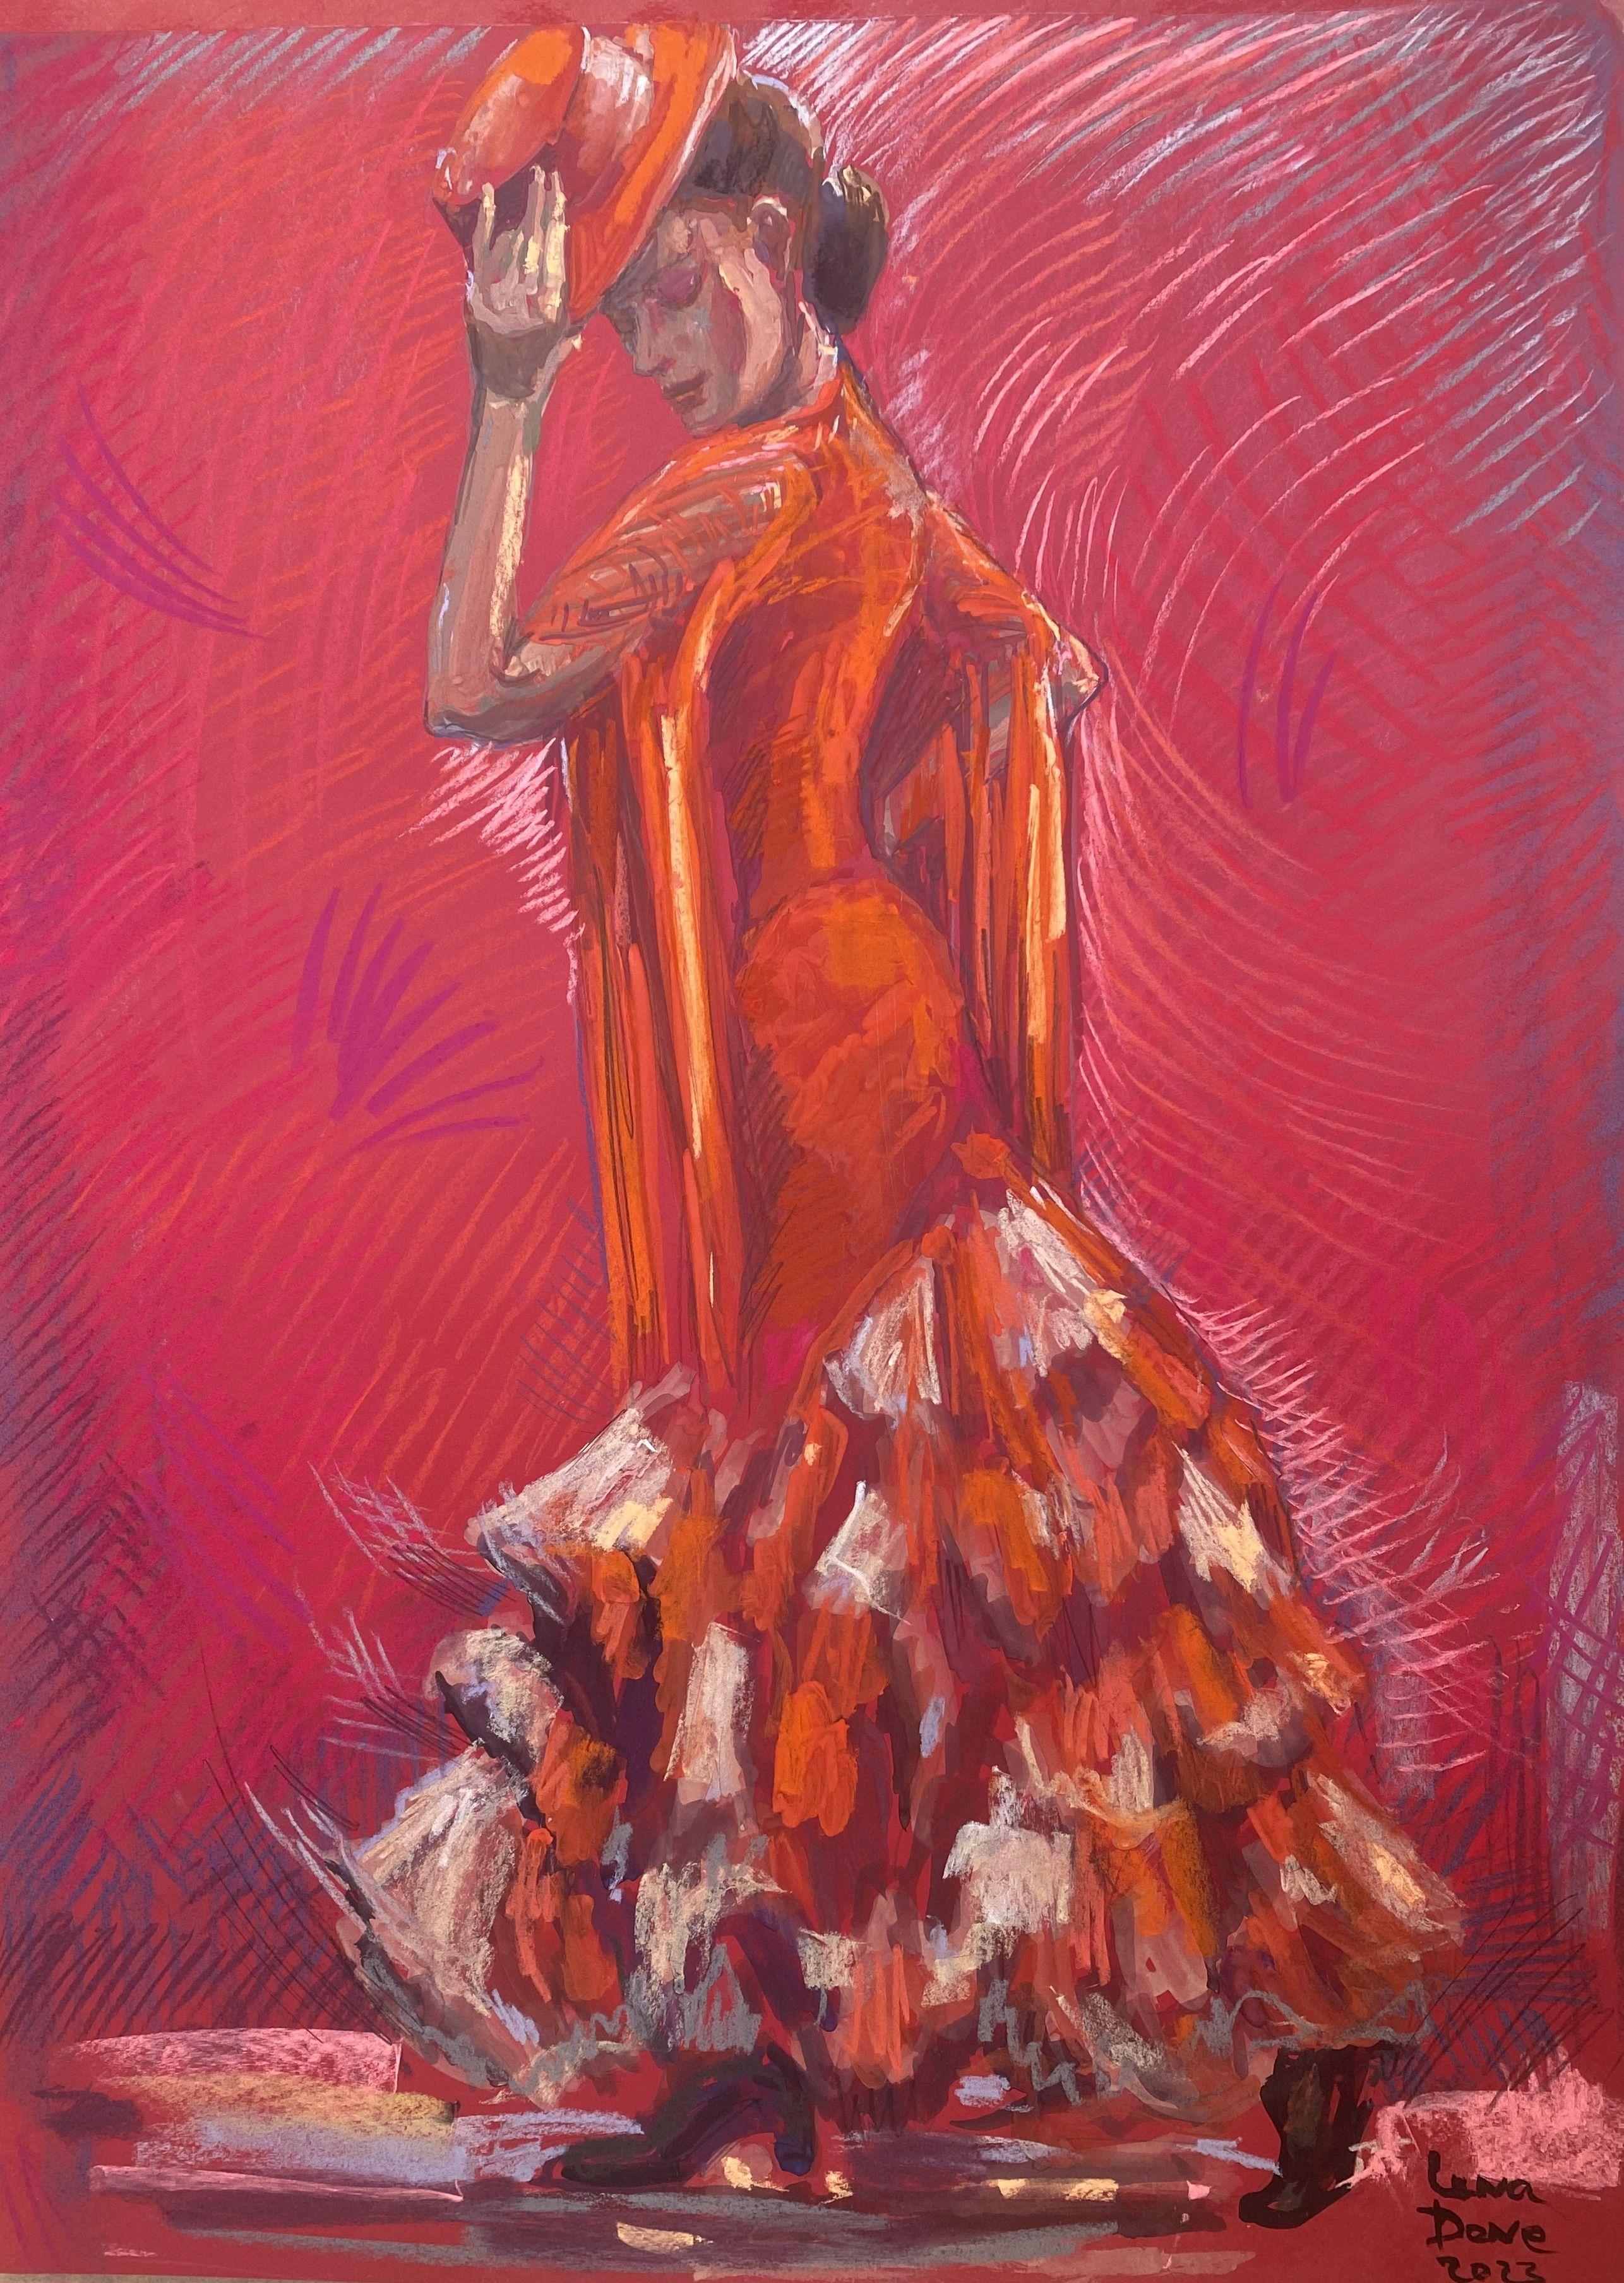 Silhouettes. Red Dancer-2, Drawing, Pastels on Paper - Art by Elena Done